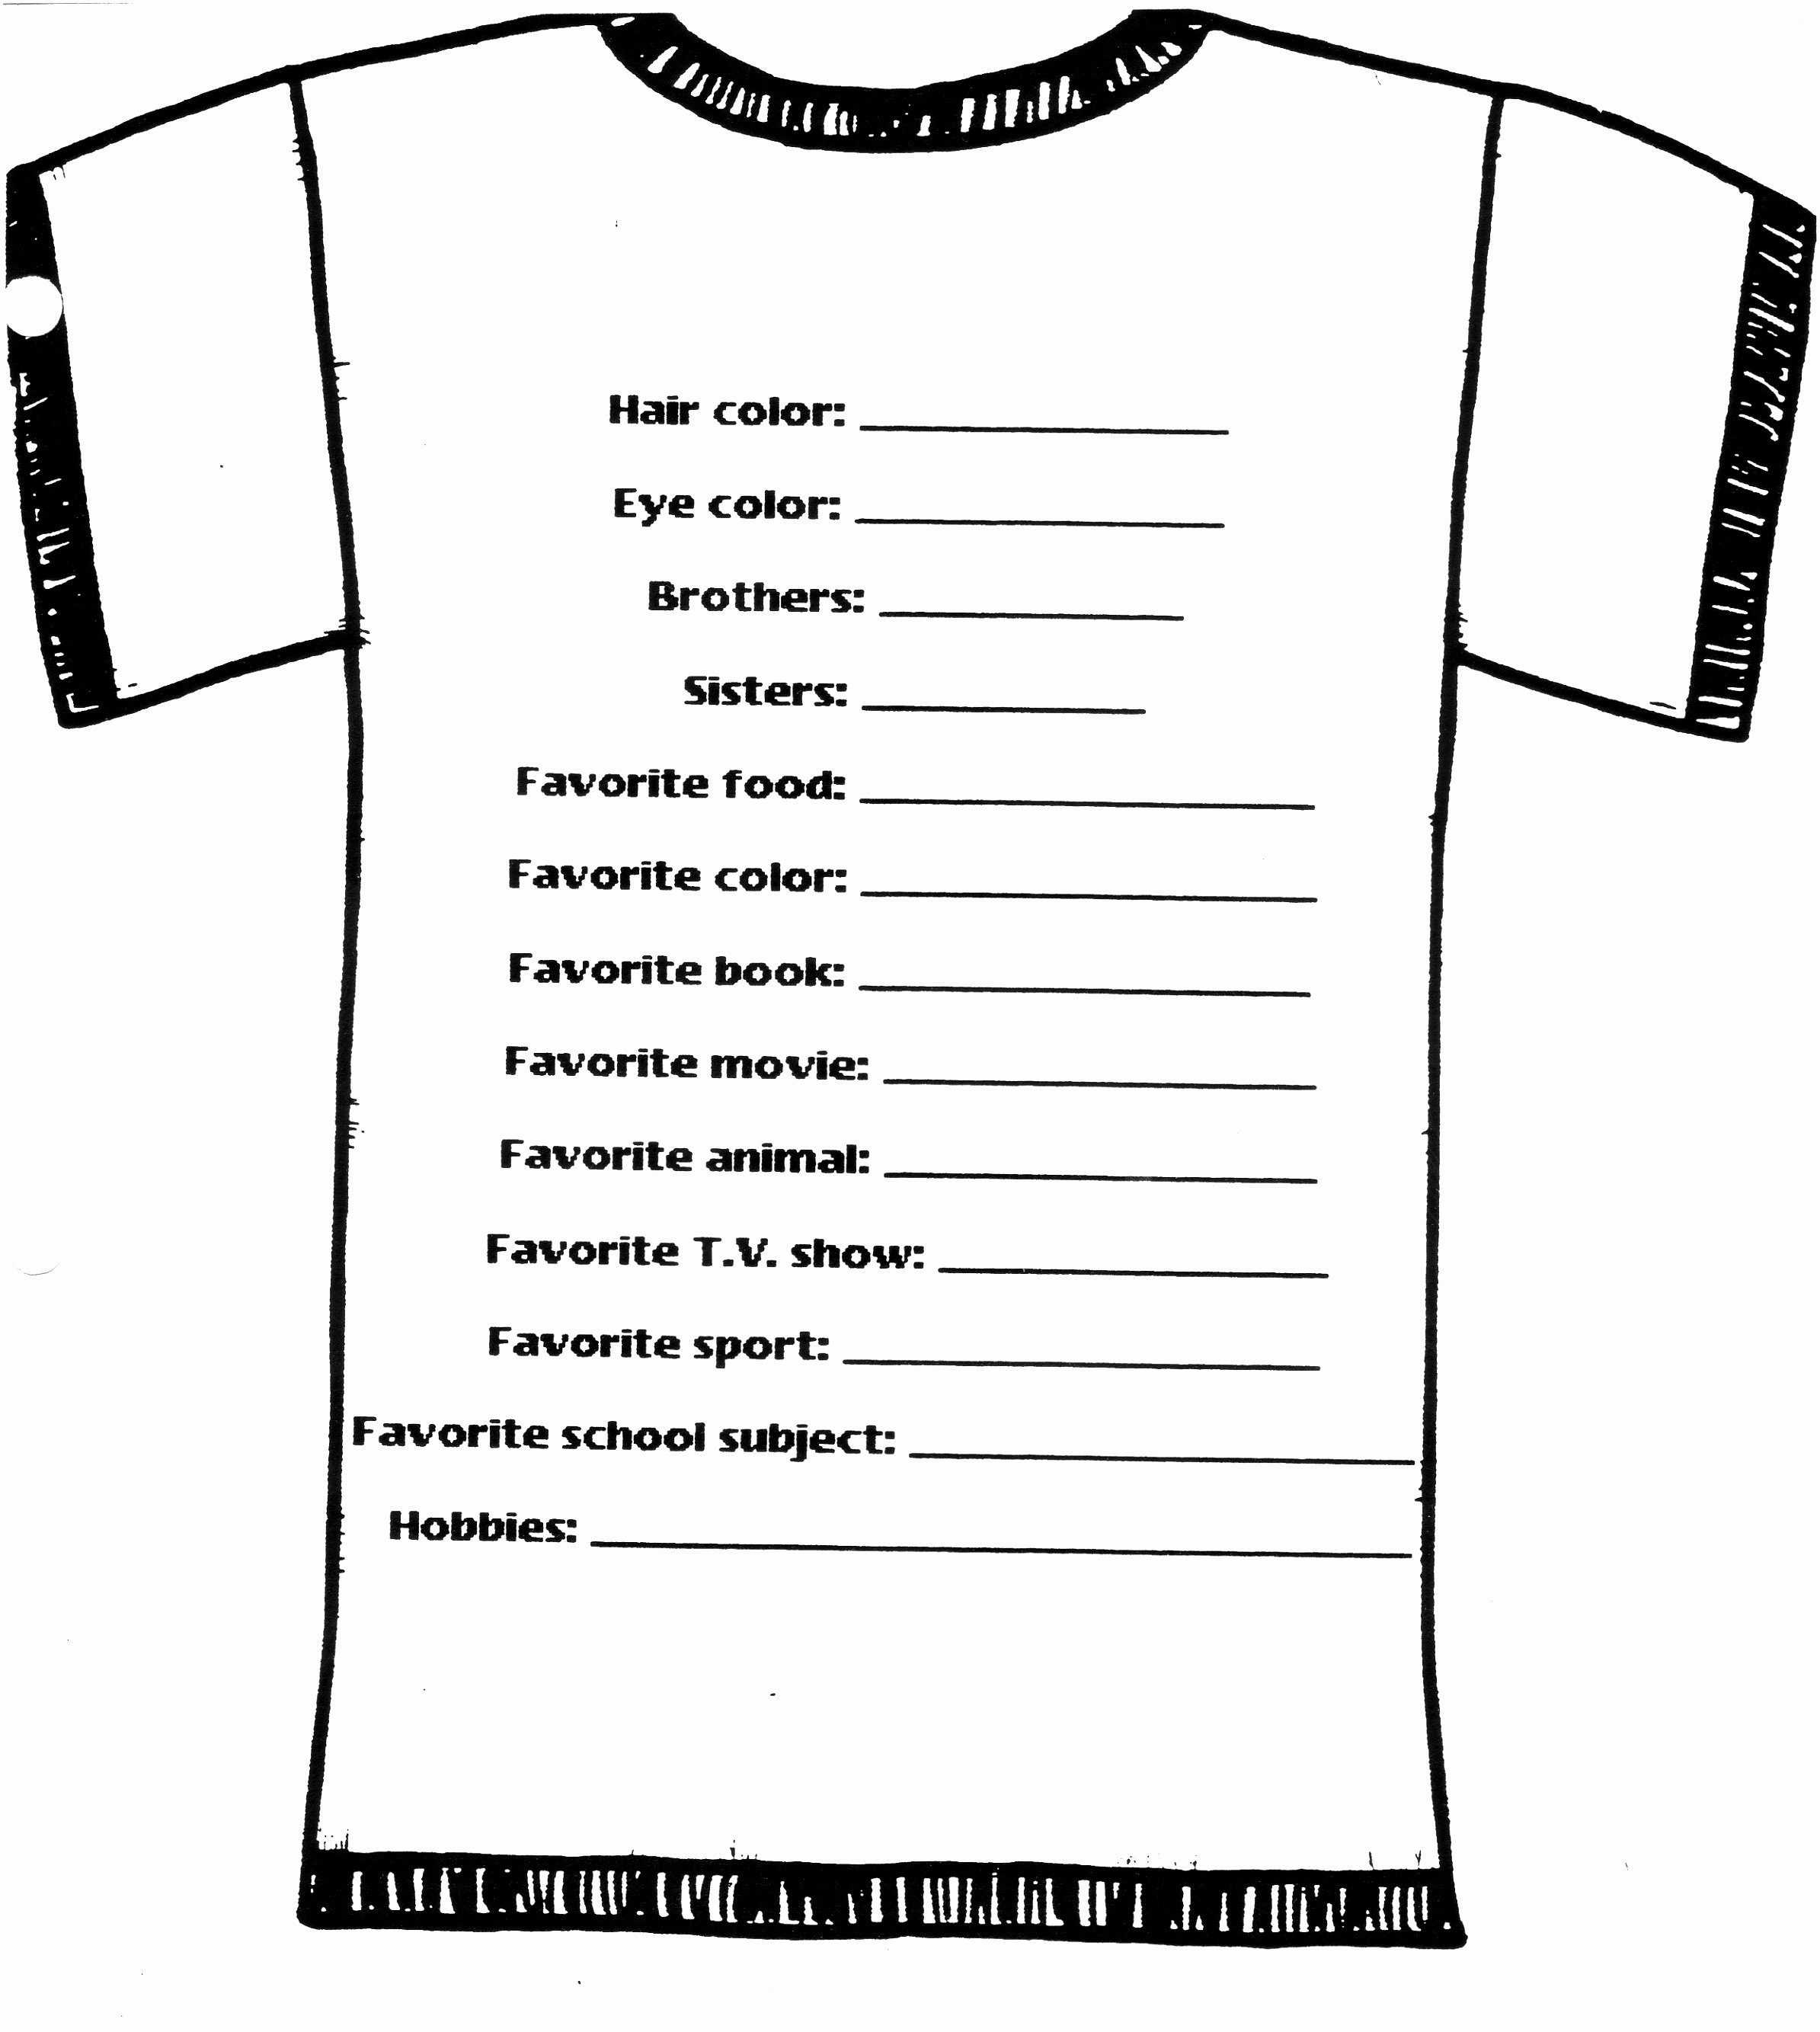 Pre order form Template Best Of 9 T Shirt Pre order form Template Woere